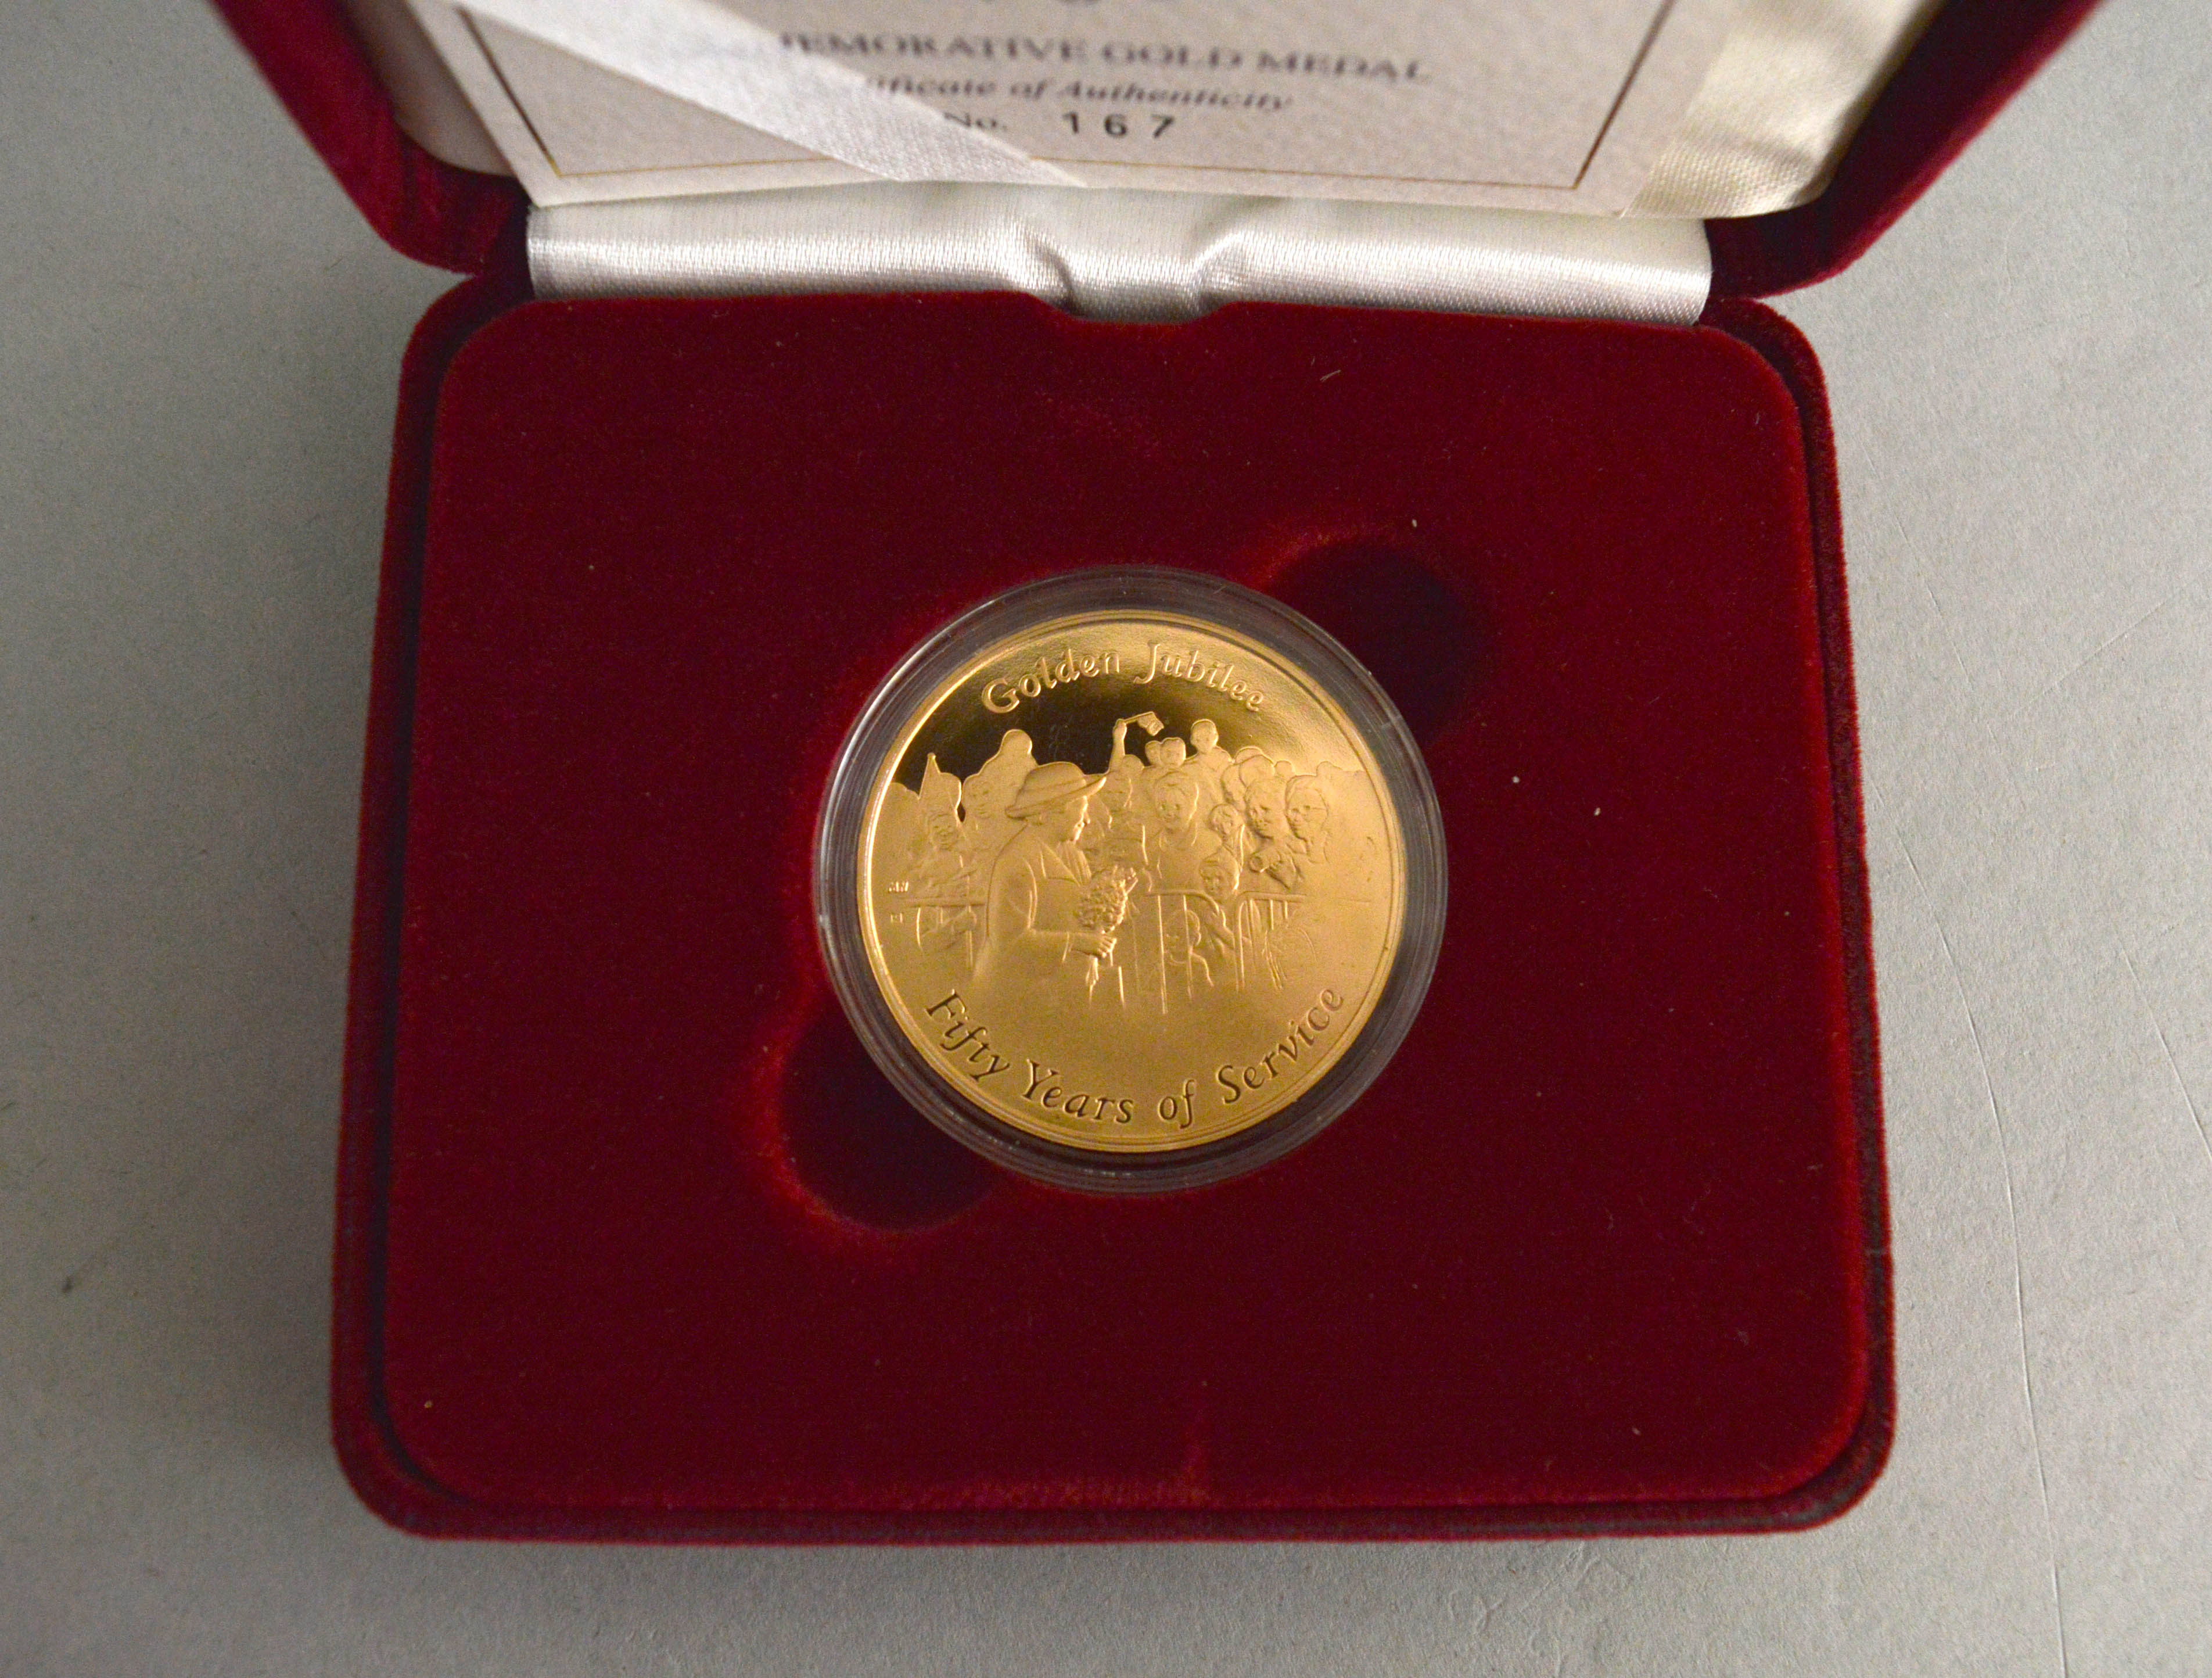 A Royal Mint 22ct gold medal commemorating The Queens Golden Jubilee, ltd edition 167 of 250, - Image 2 of 3